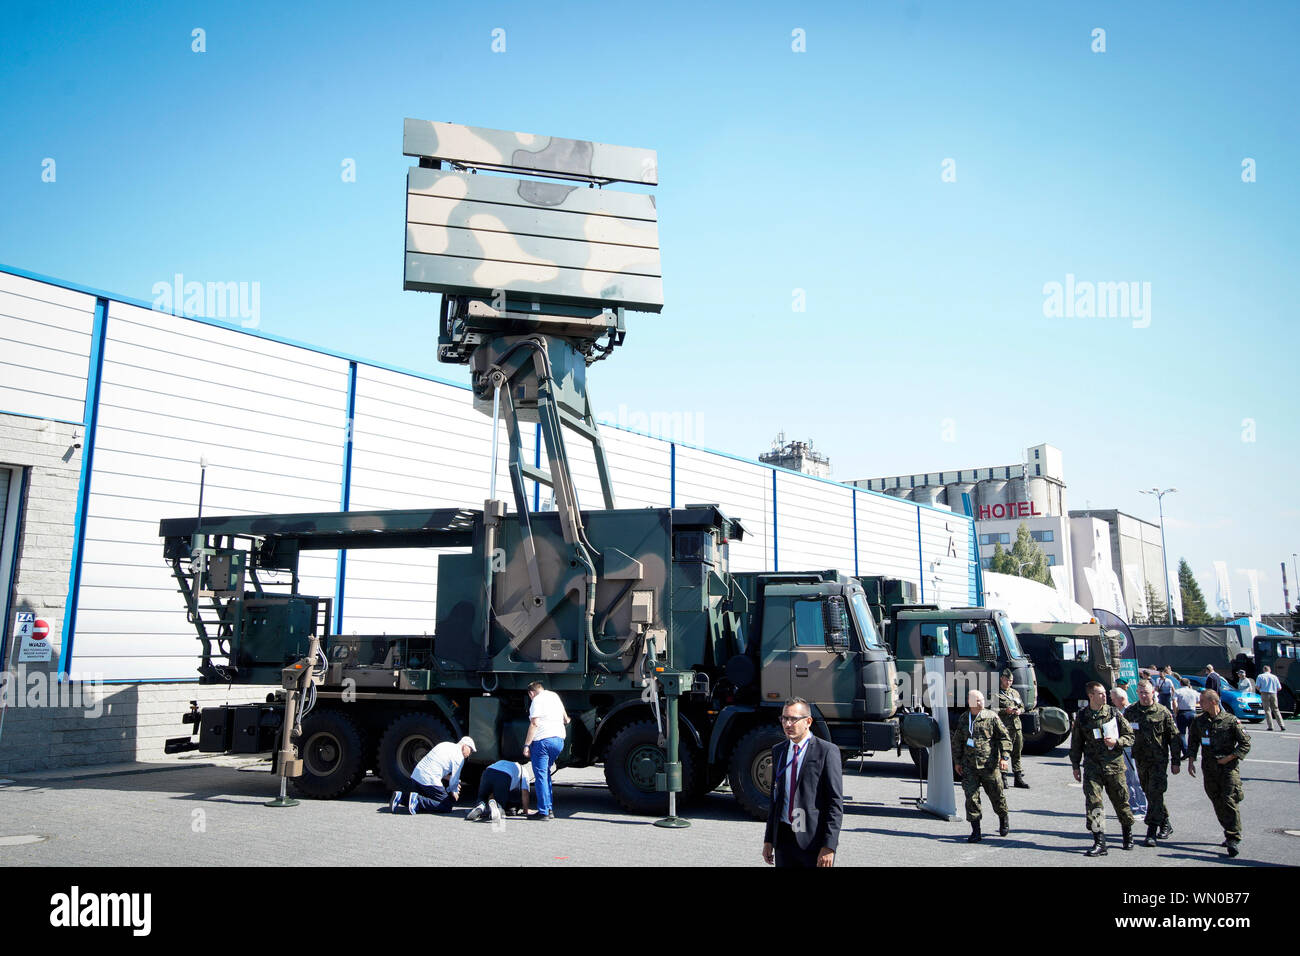 (190905) -- KIELCE (POLAND), Sept. 5, 2019 (Xinhua) -- A NUR-15 radar vehicle is displayed at the 27th International Defence Industry Exhibition in Kielce, Poland, on Sept. 5, 2019. The 27th International Defence Industry Exhibition MSPO, one of the largest in Central and Eastern Europe with around 600 exhibitors, is held here from Sept. 3 to Sept. 6. (Photo by Jaap Arriens/Xinhua) Stock Photo